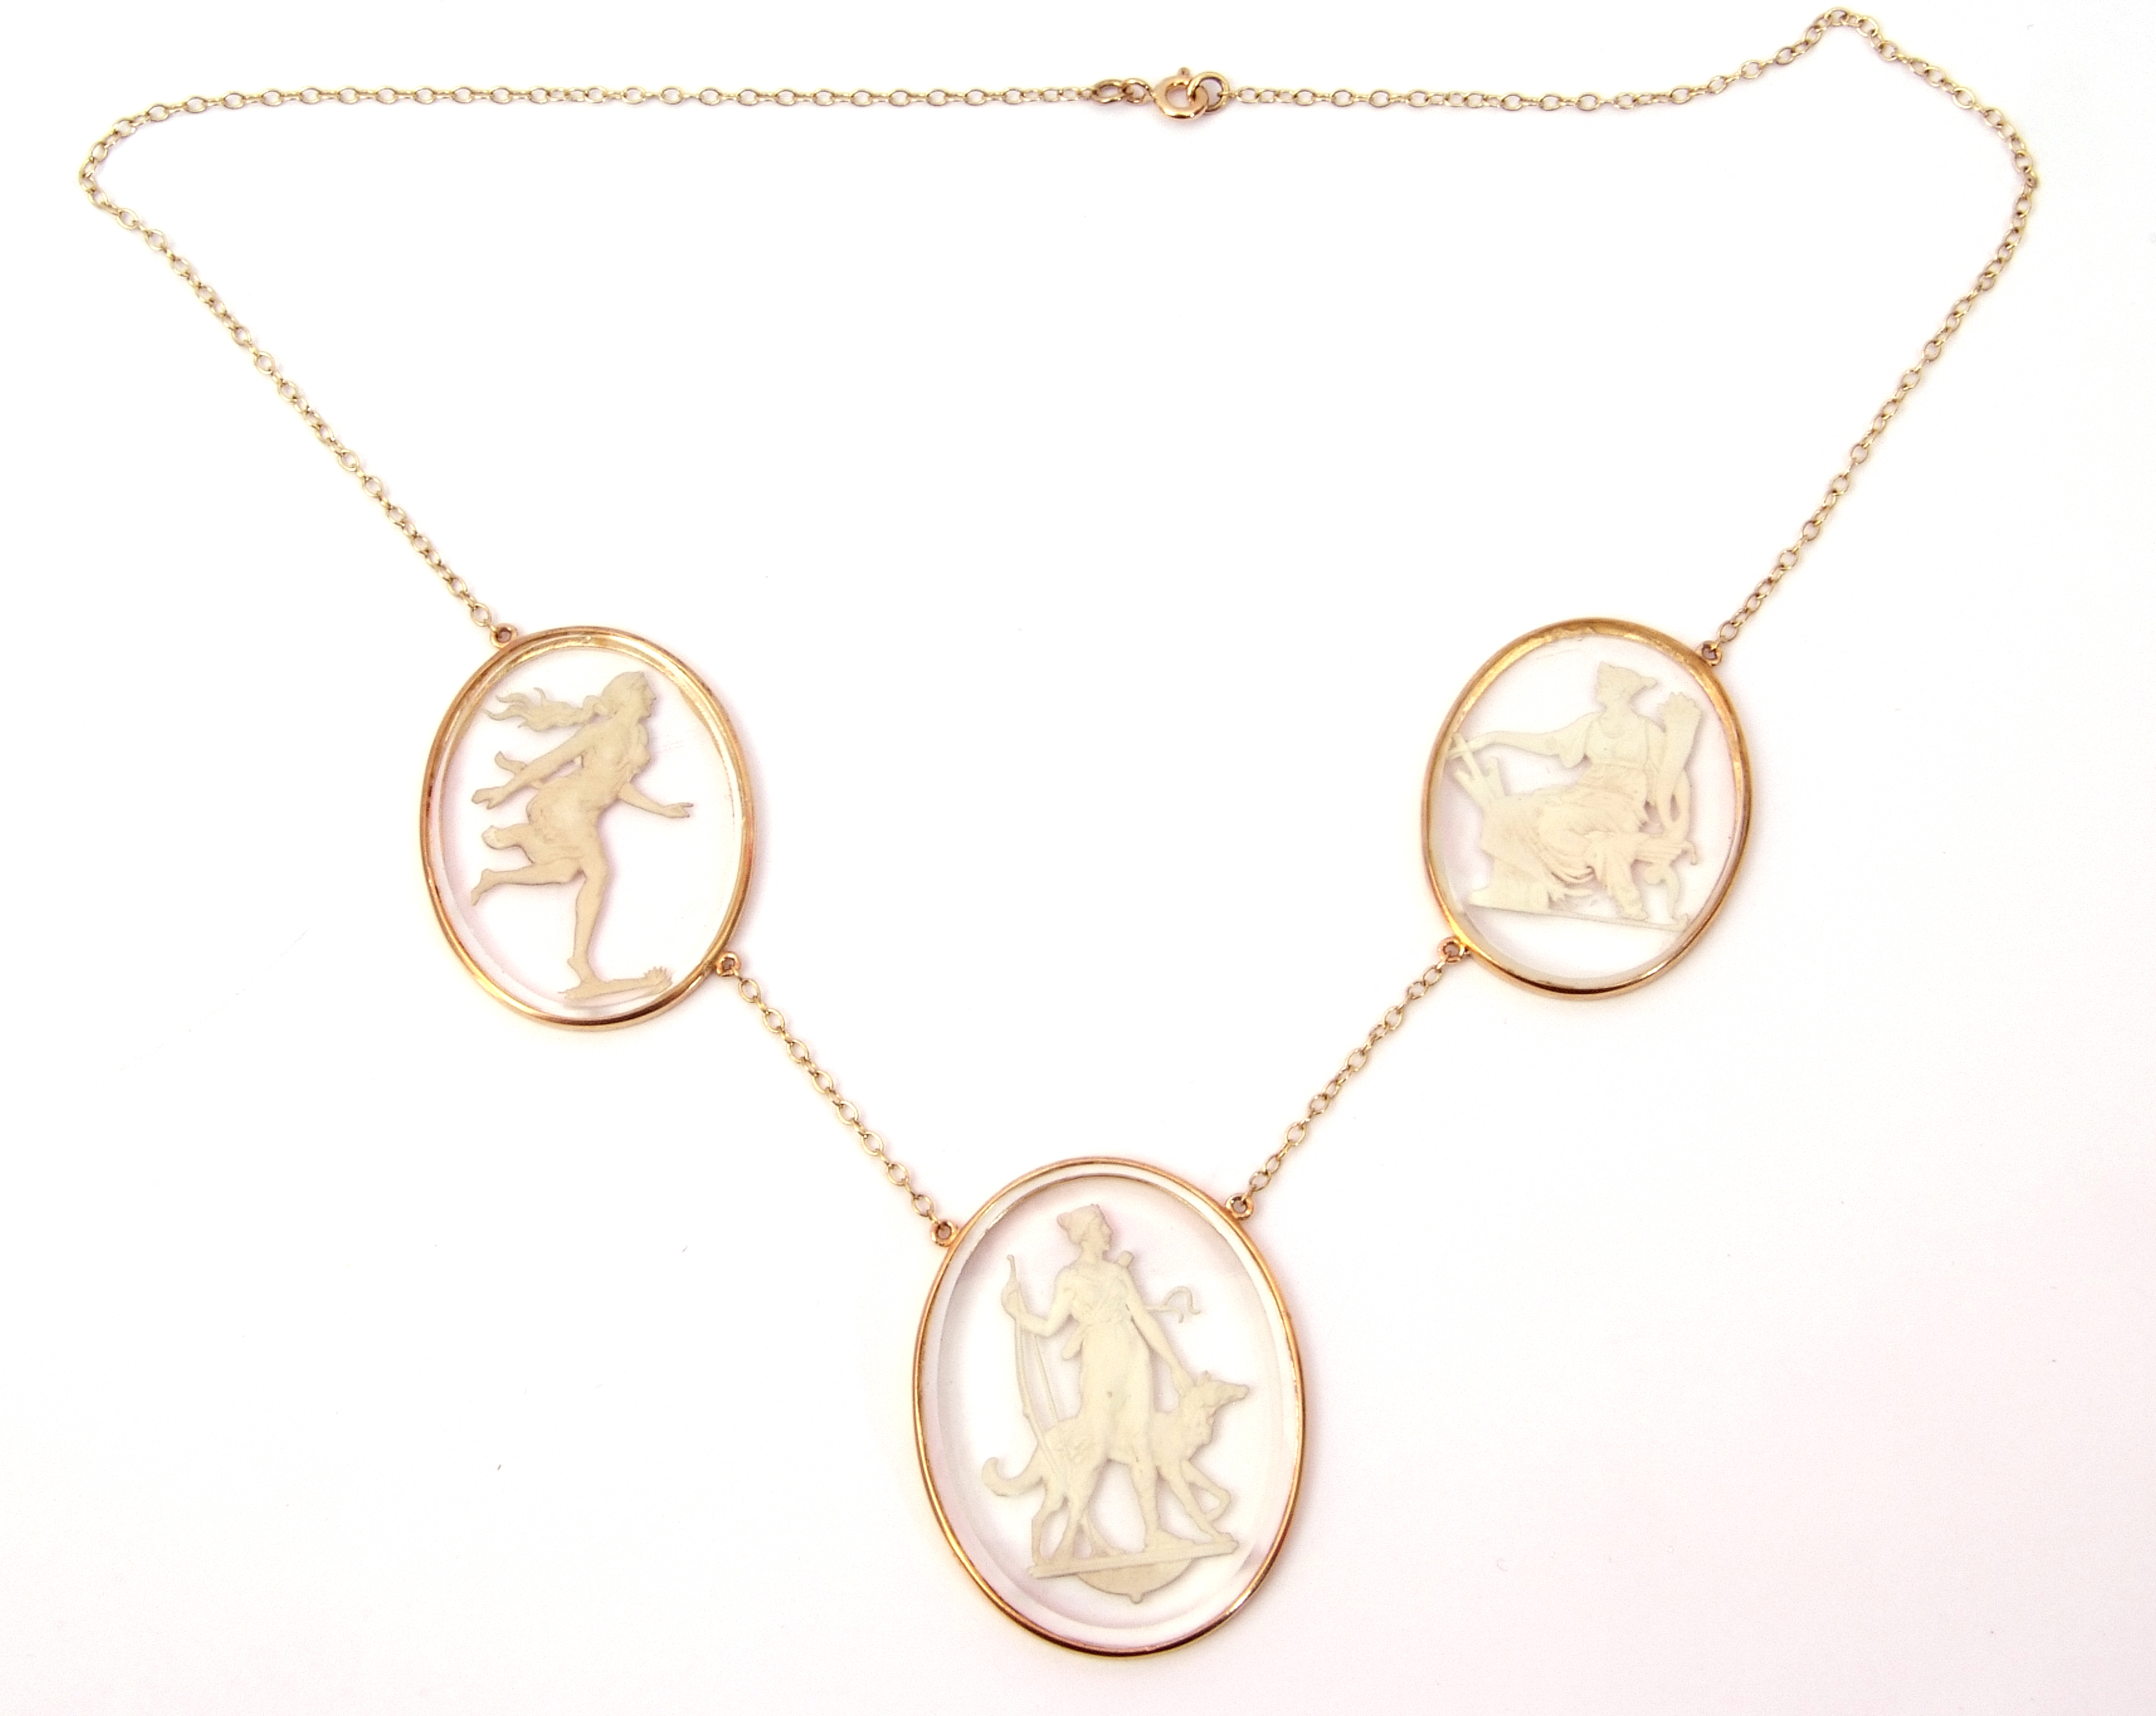 9ct gold glass intaglio necklace featuring 3 graduated glass intaglios depicting classical figures